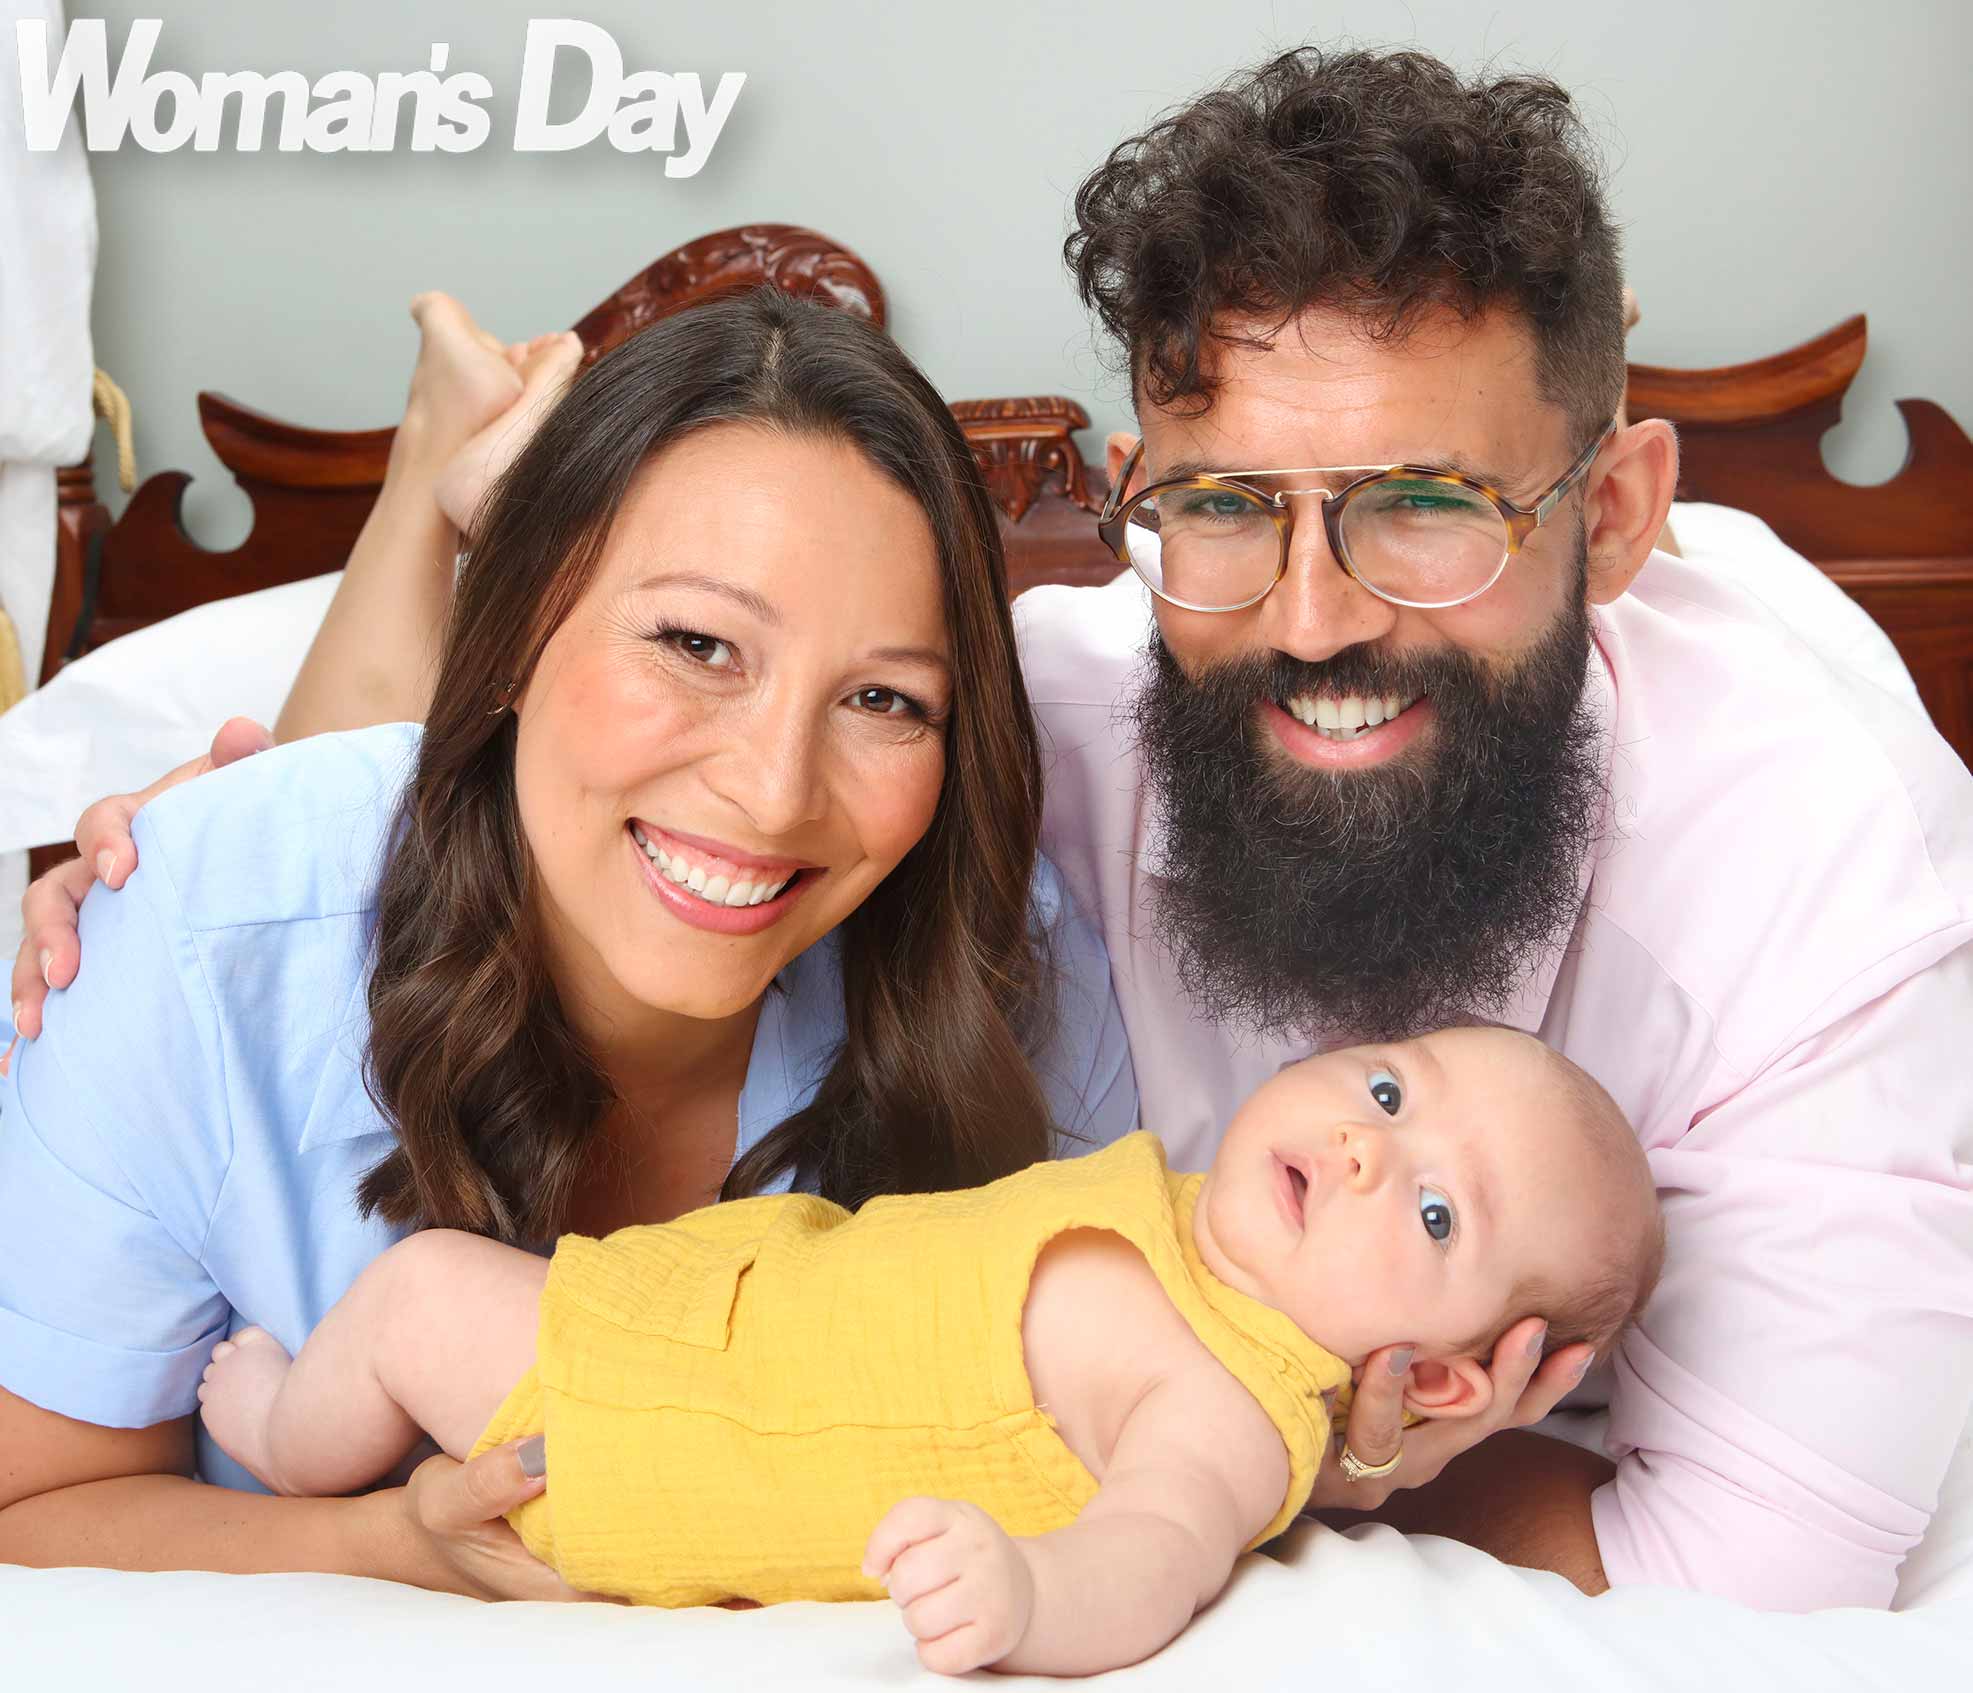 Melissa Chan-Green introduces her adorable son Busby and shares their ‘spooky’ royal connection